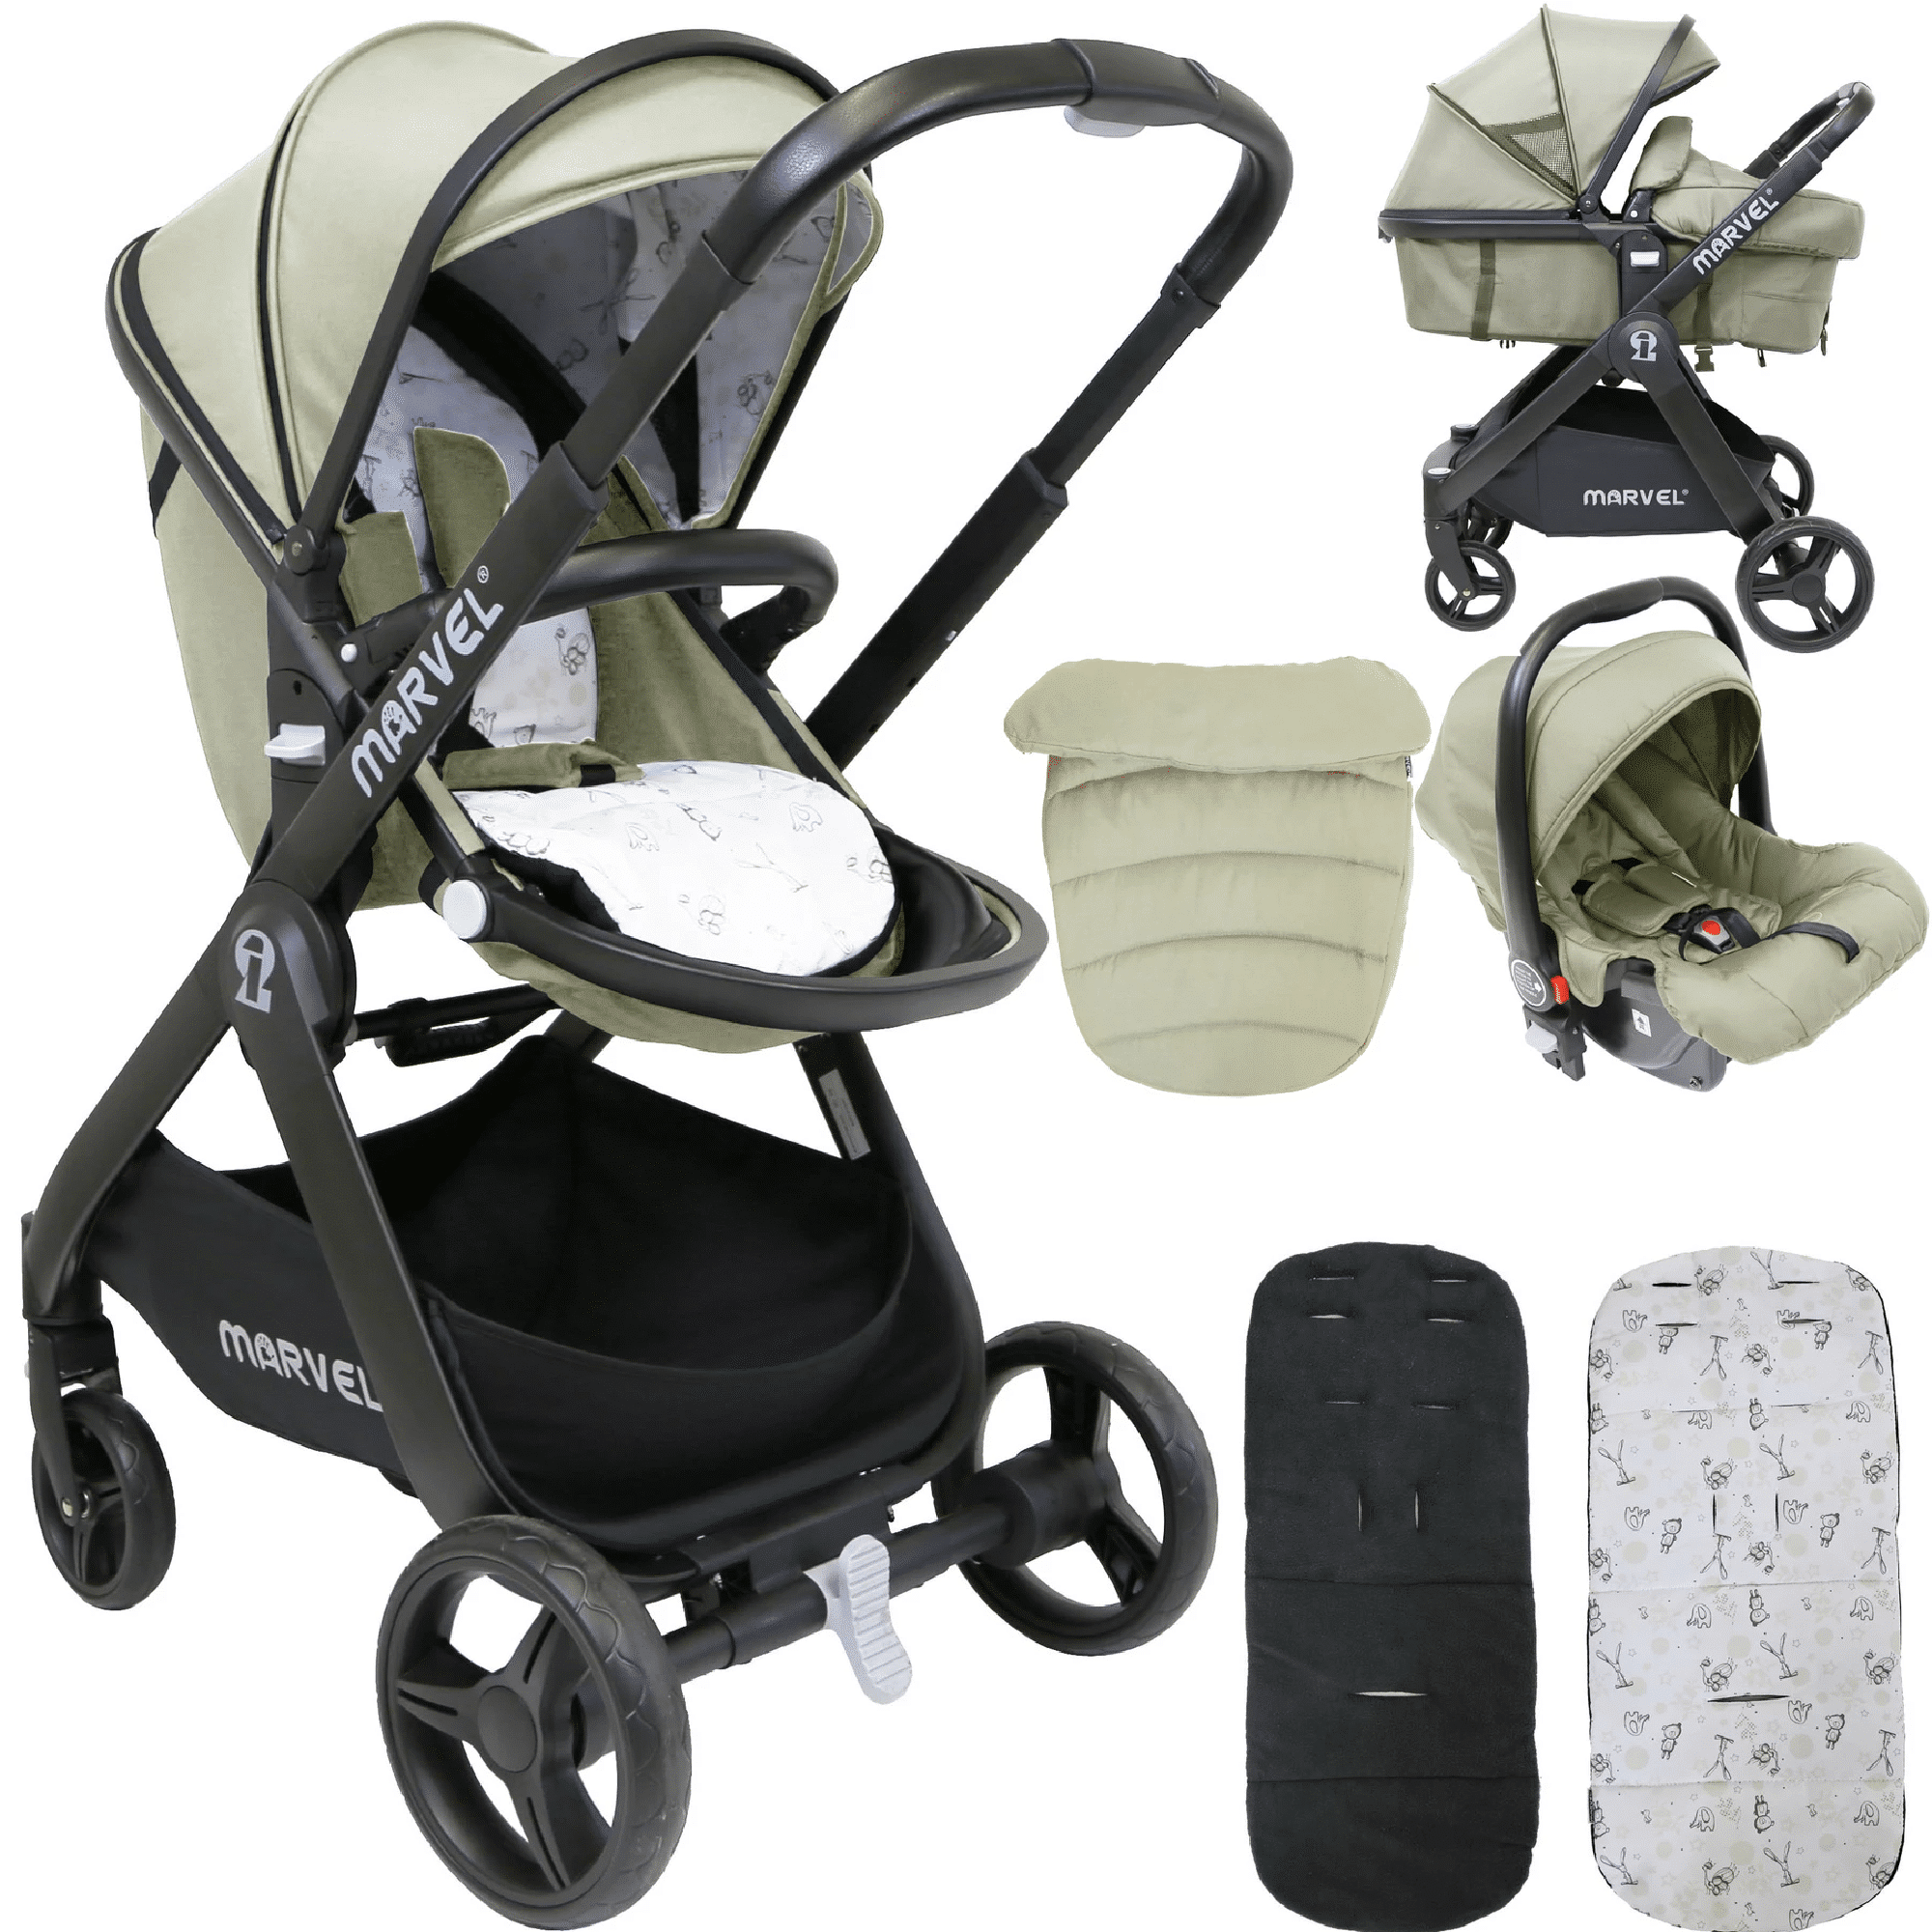 isafe travel system review